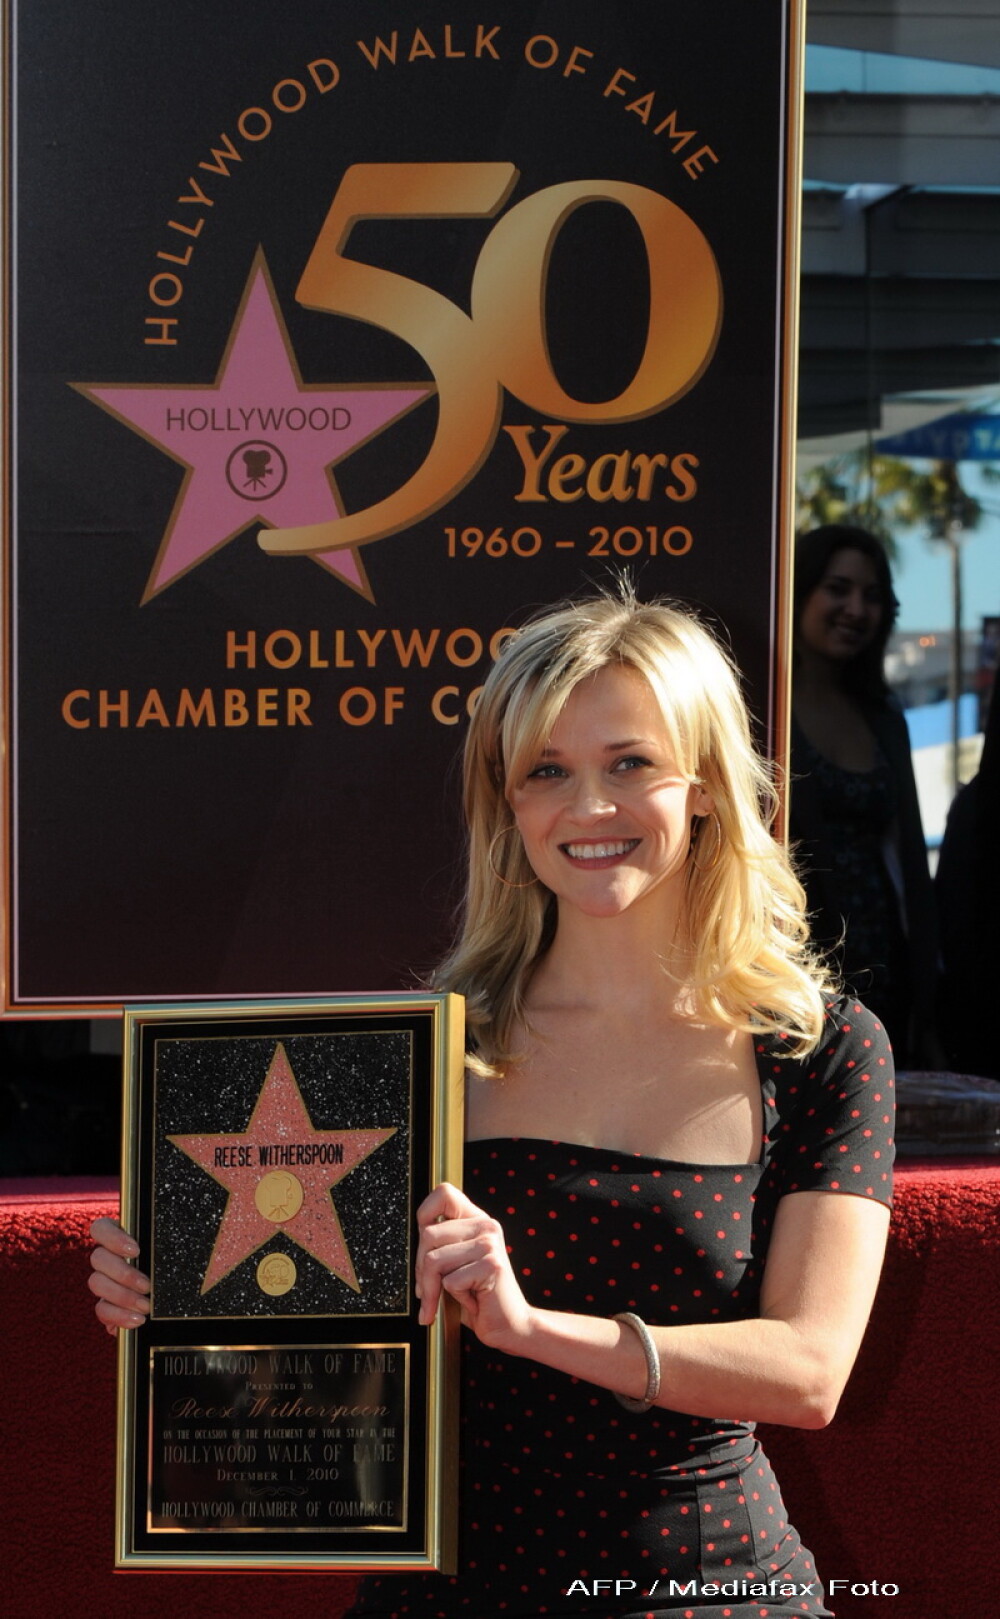 Reese Witherspoon are propria stea pe Hollywood Walk of Fame - Imaginea 2